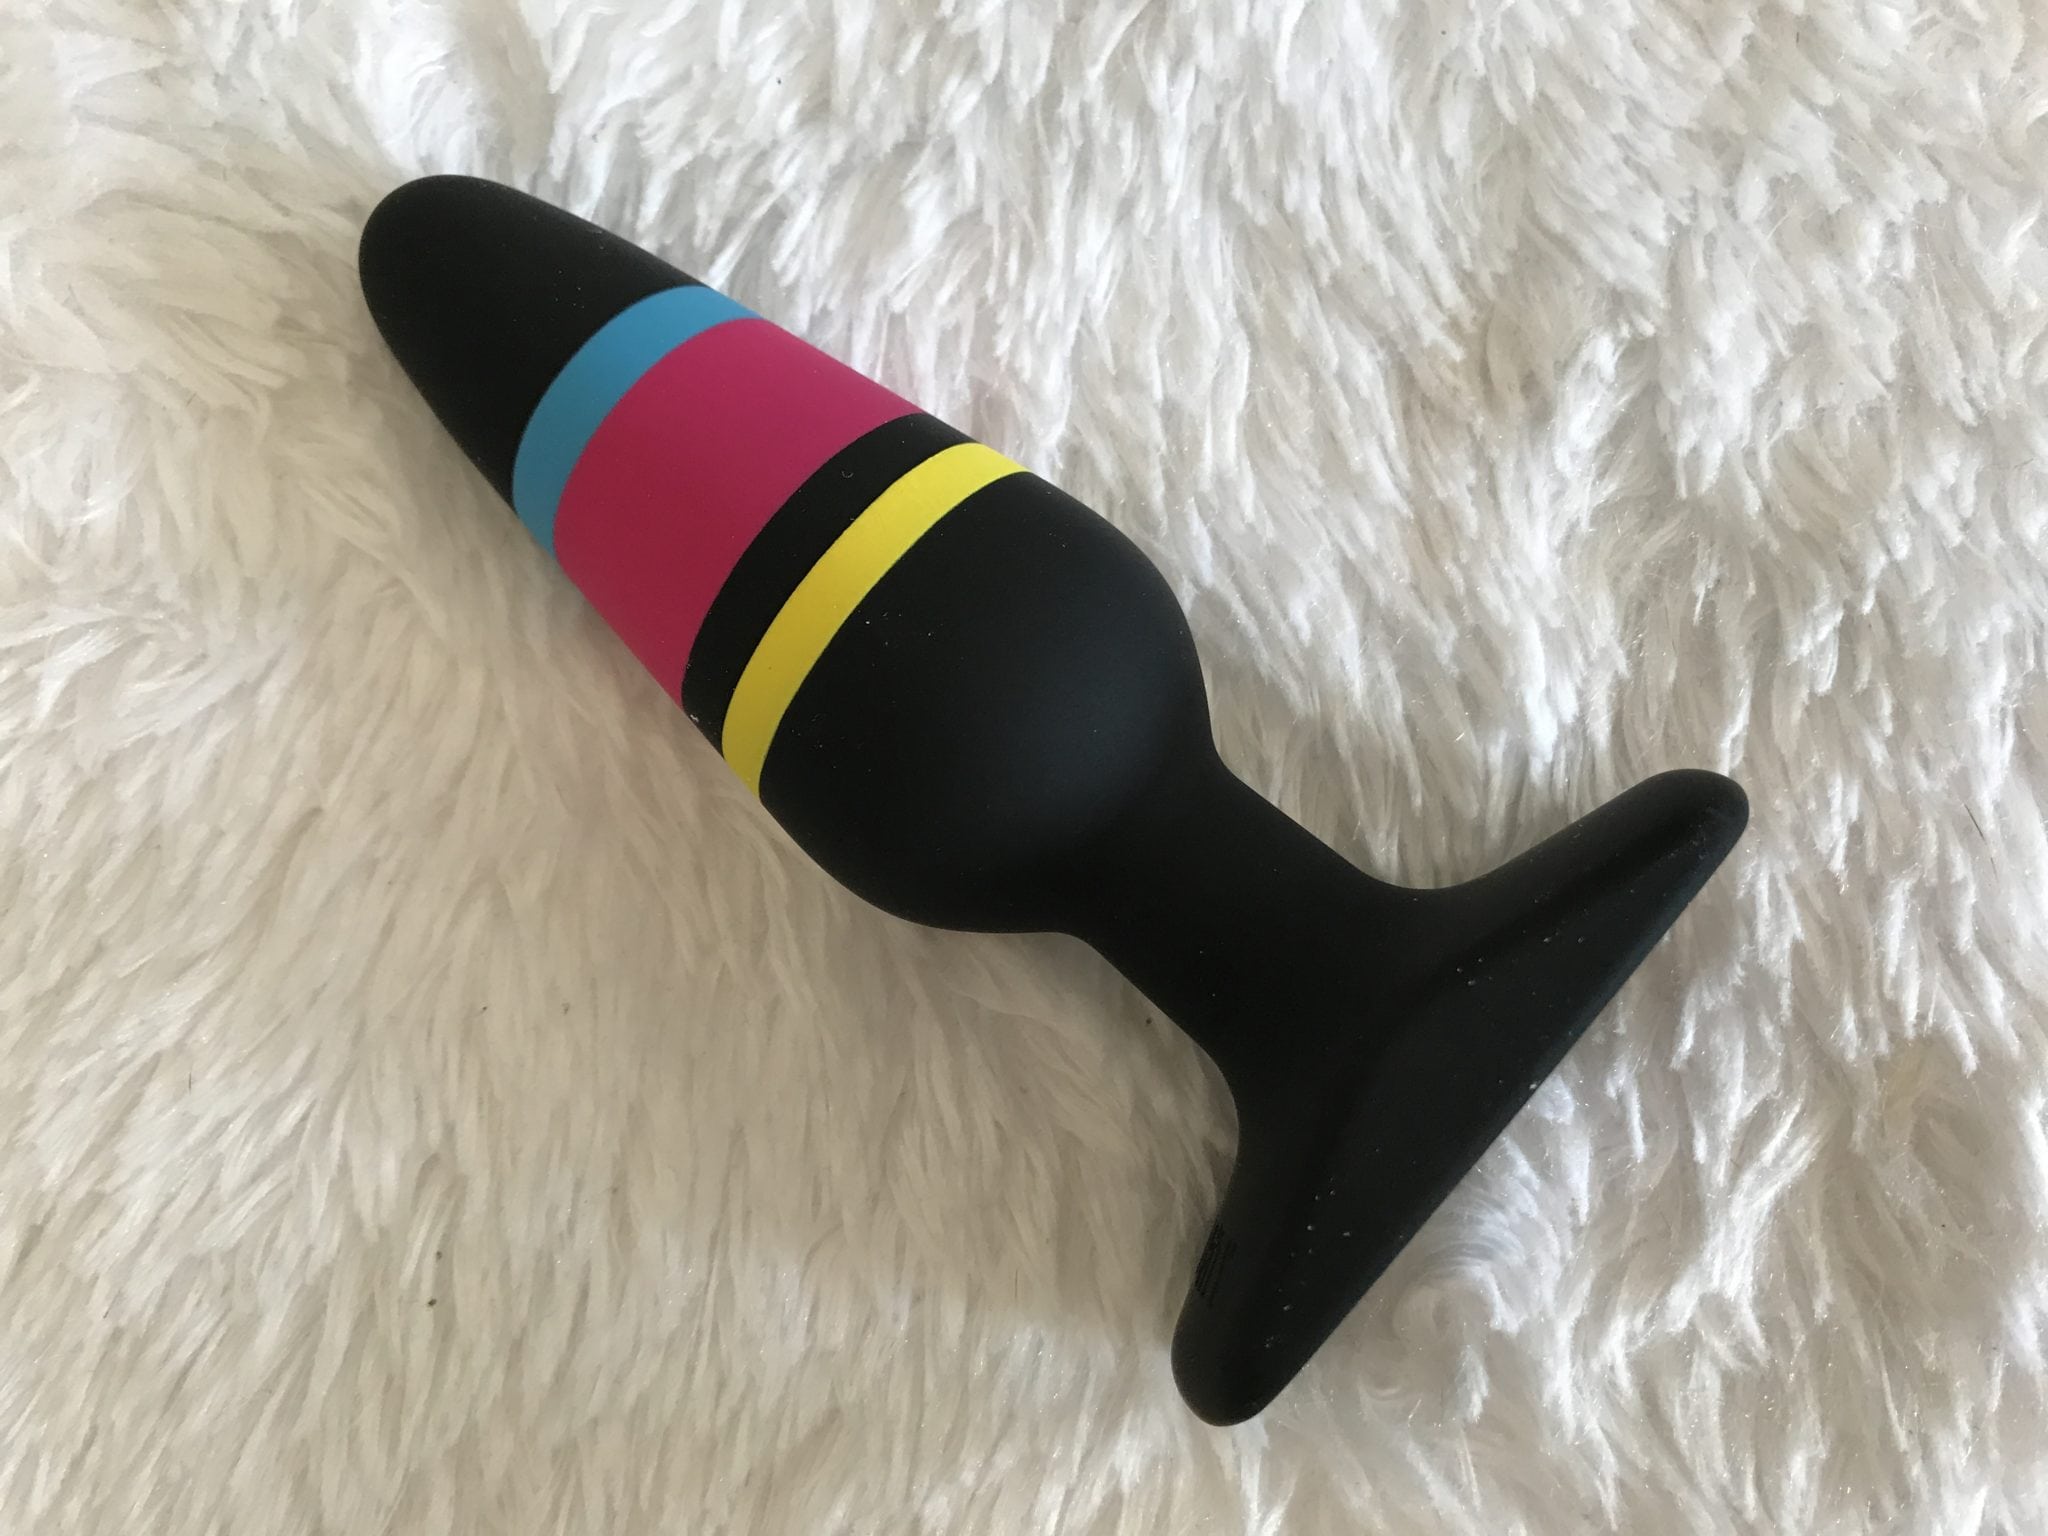 Broad City Butt Plug Review